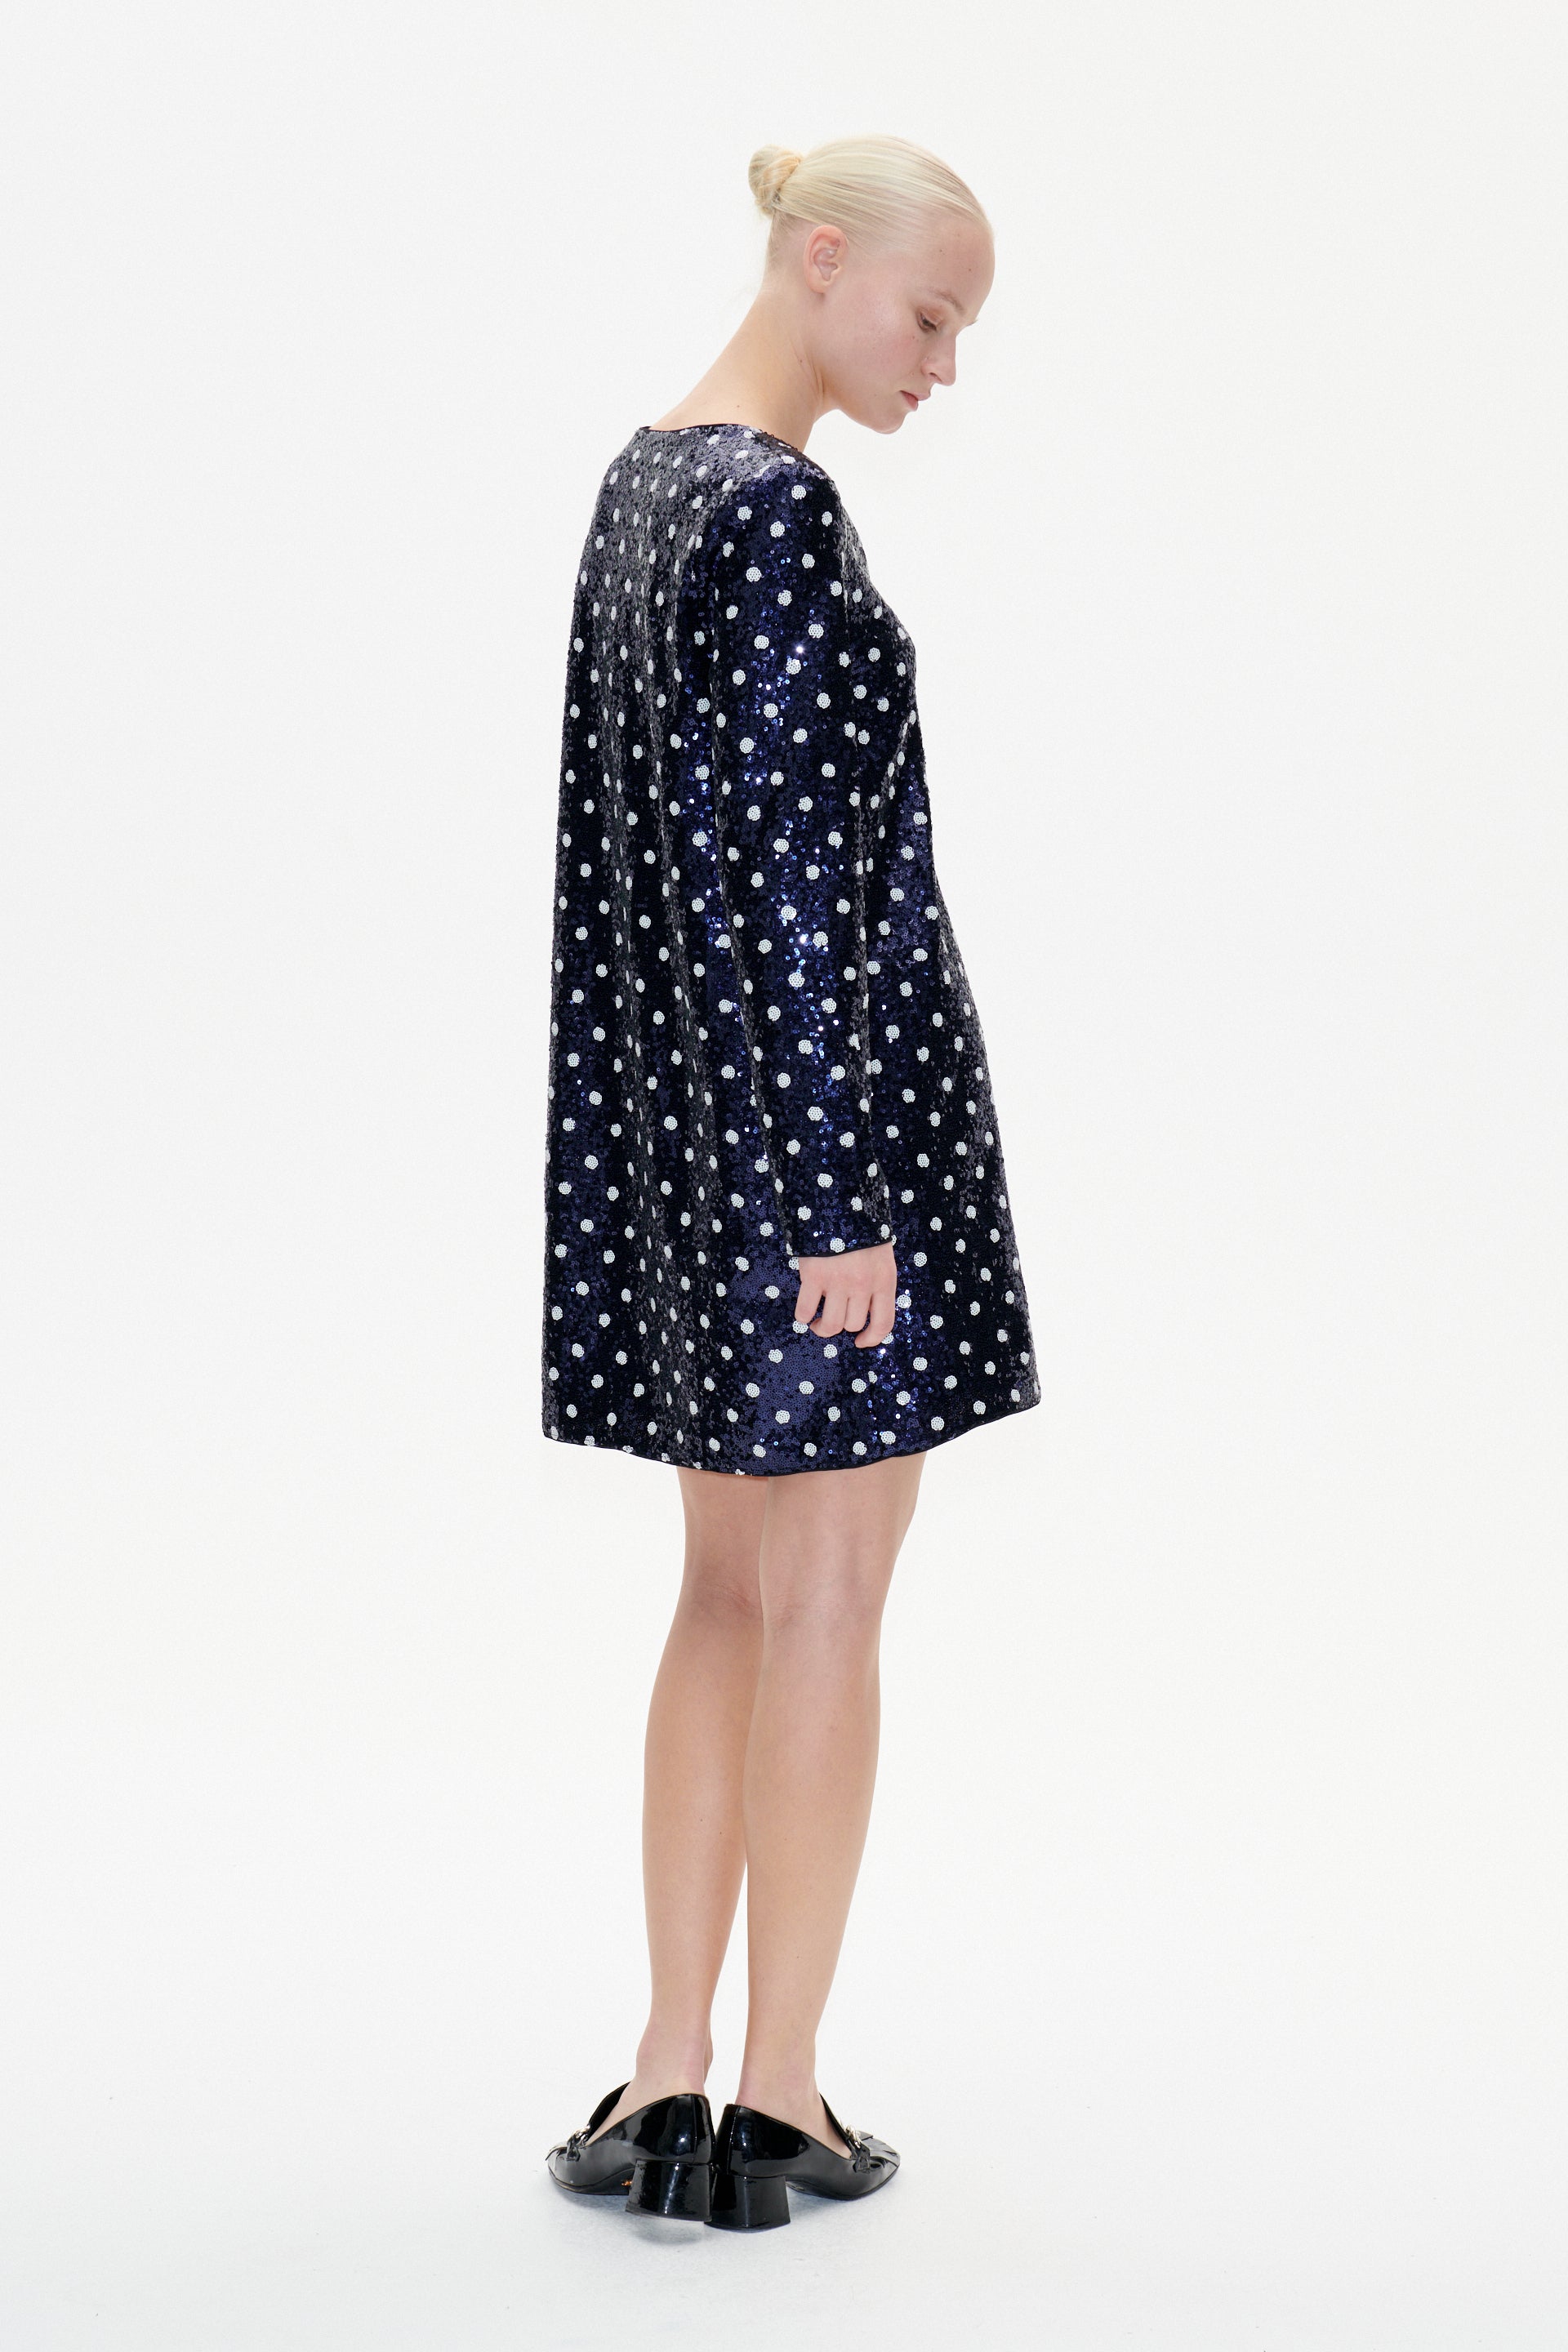 V neck short sequin shift dress with navy sequins and white dots with long sleeves